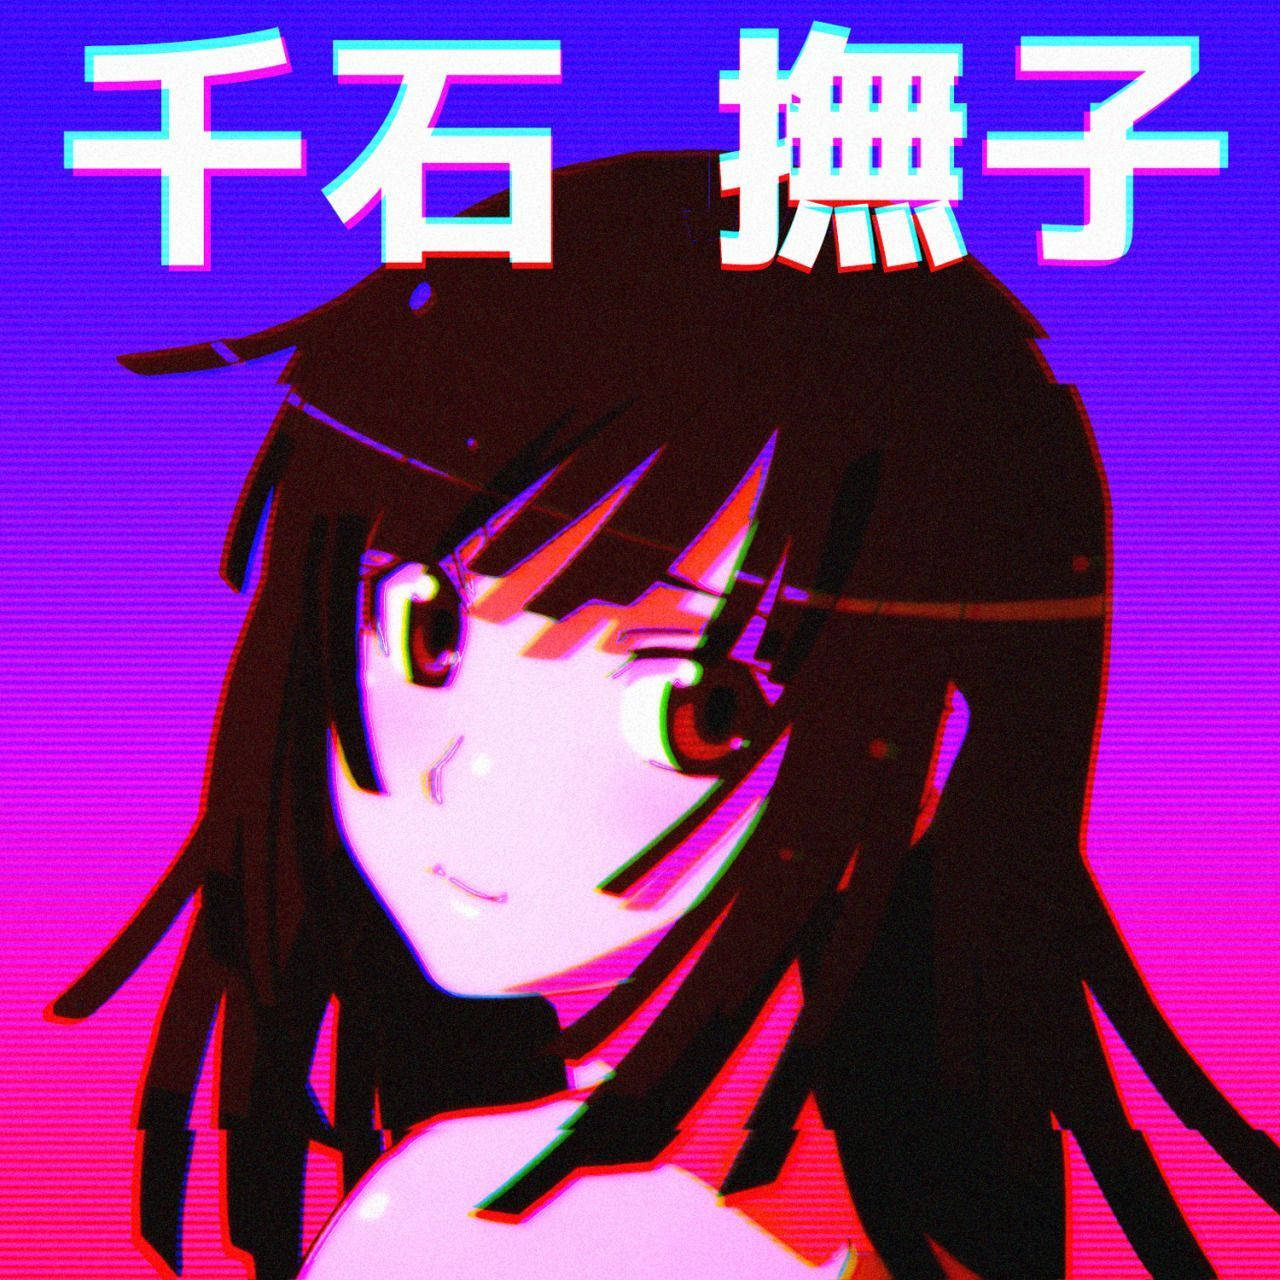 Vaporwave Anime Wallpapers - KoLPaPer - Awesome Free HD Wallpapers